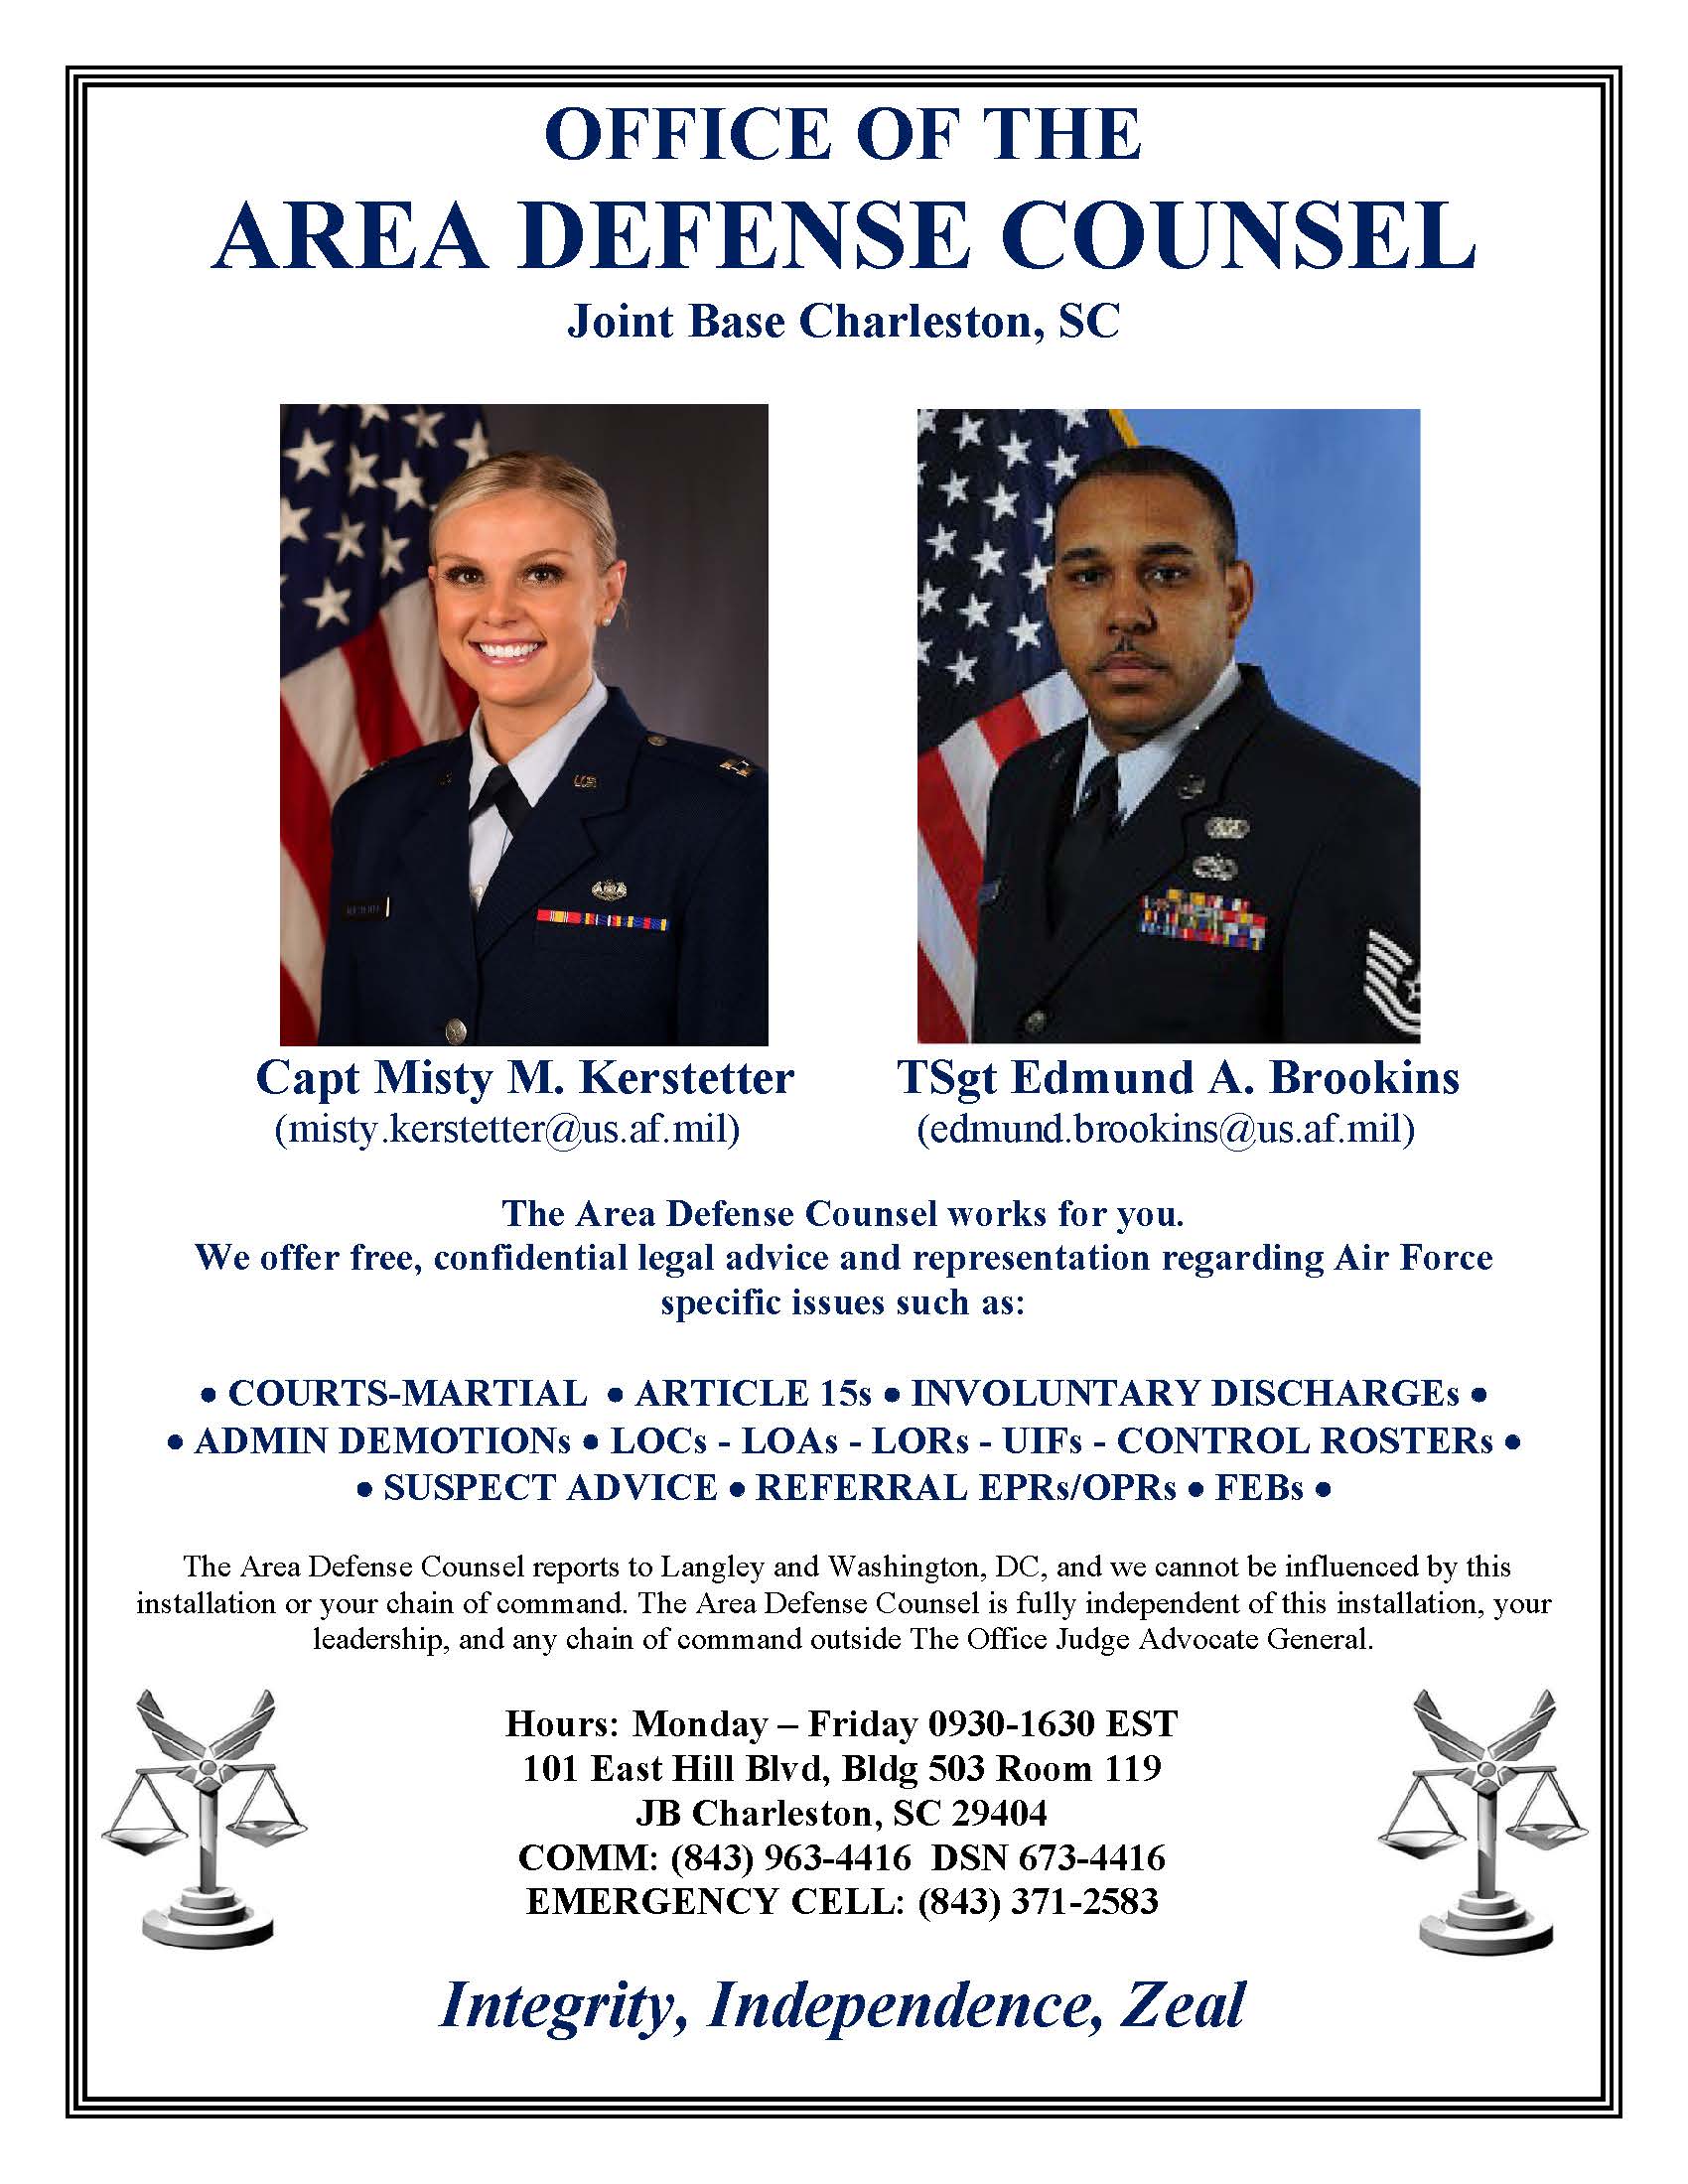 A poster for the Area Defense Counsel